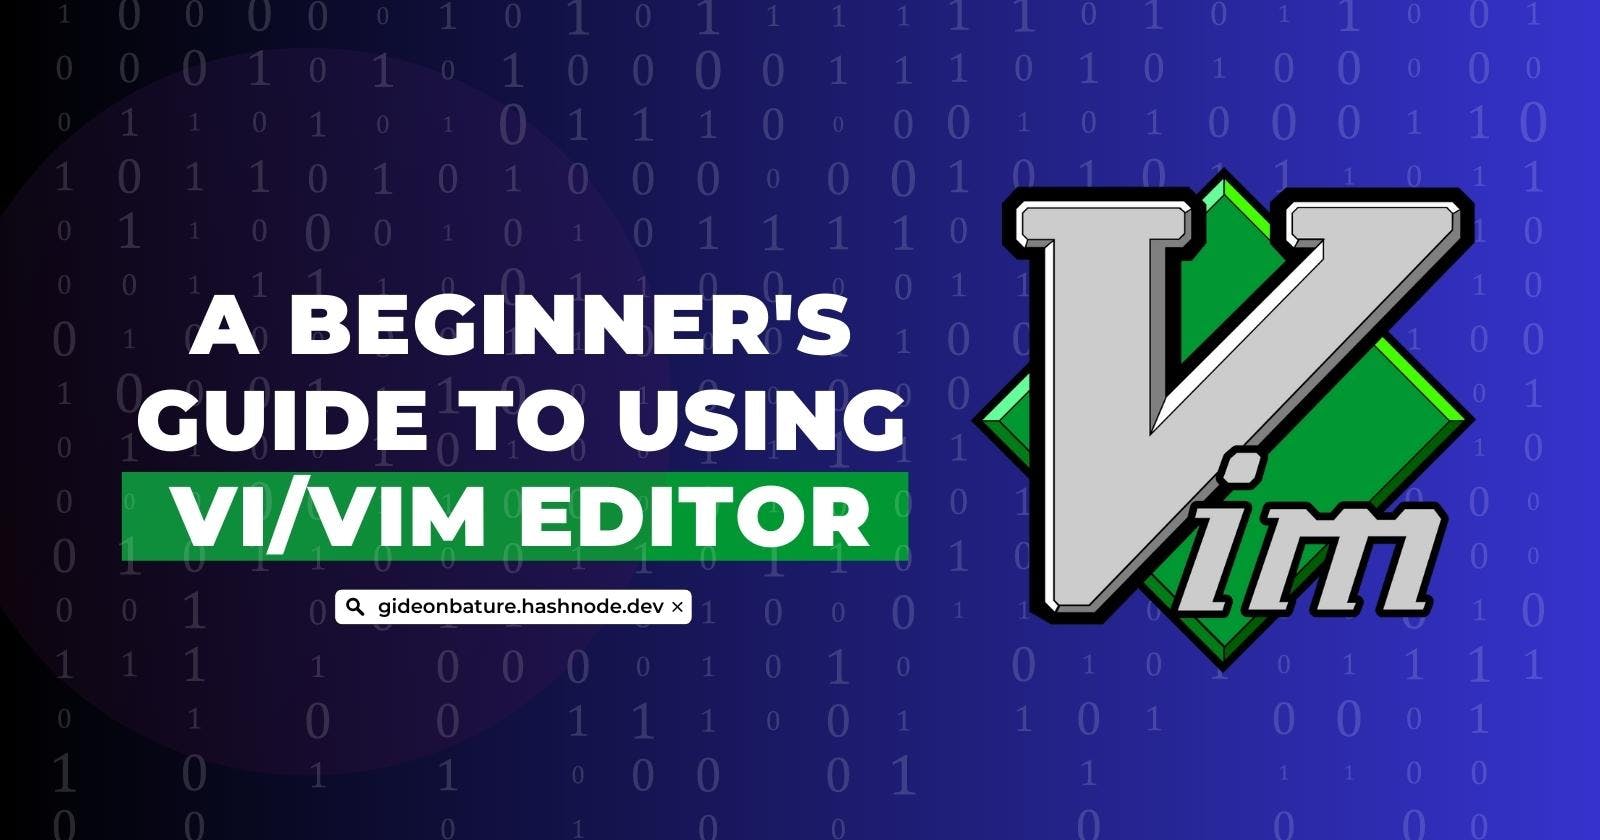 A Beginner's Guide To Using Vi/vim Editor